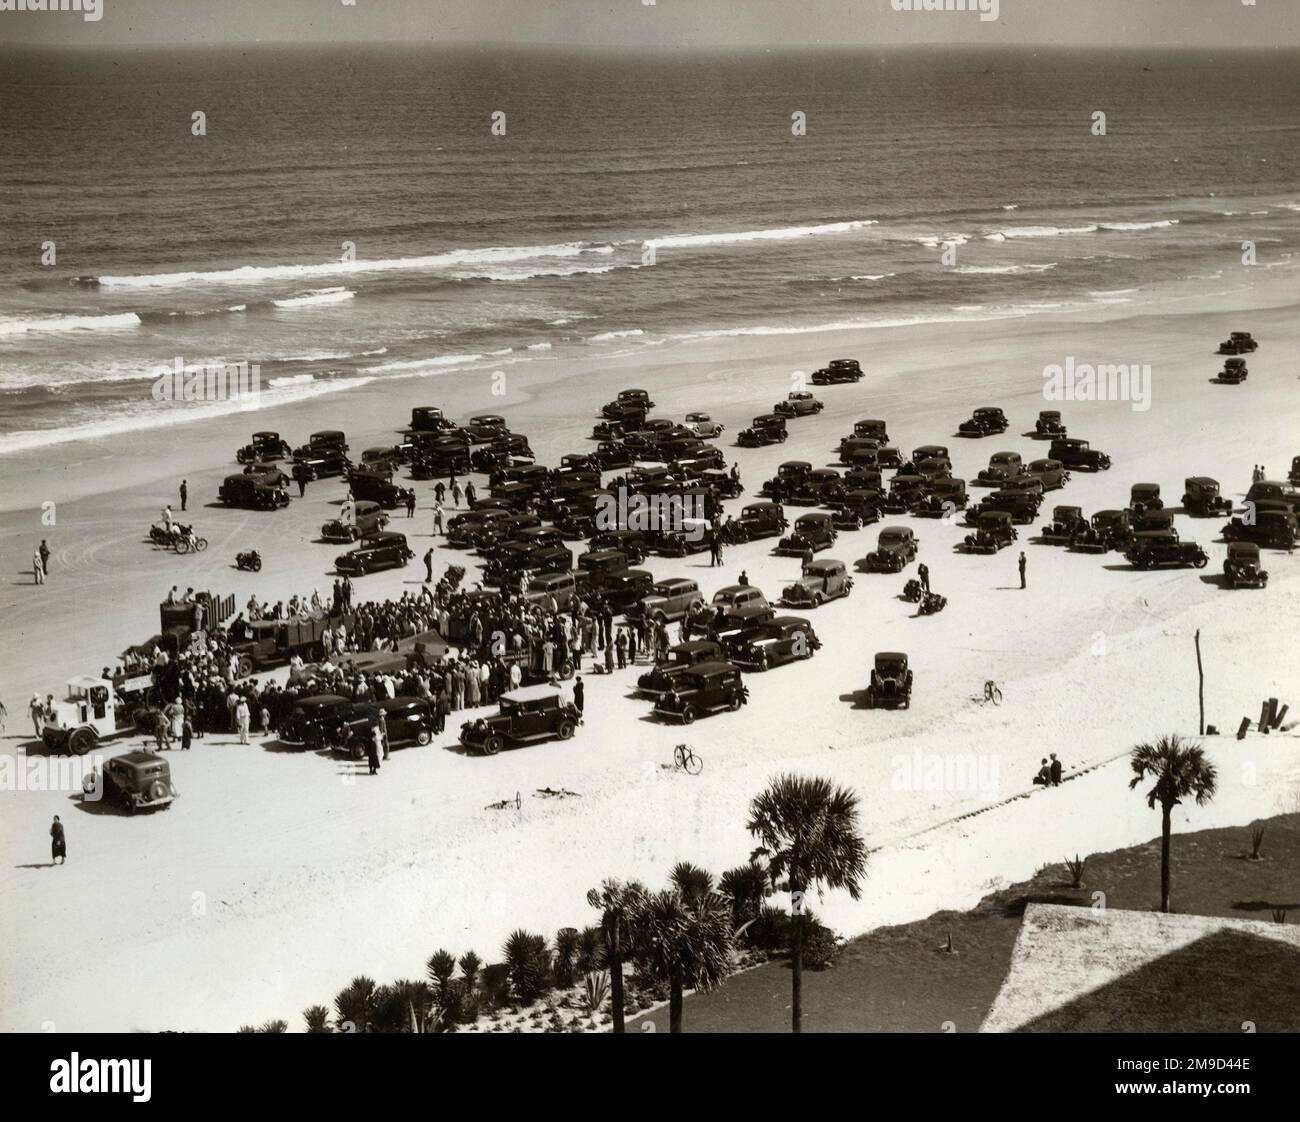 Distant view of Daytona Beach with Blue Bird among crowds and private cars with sea in background. Stock Photo